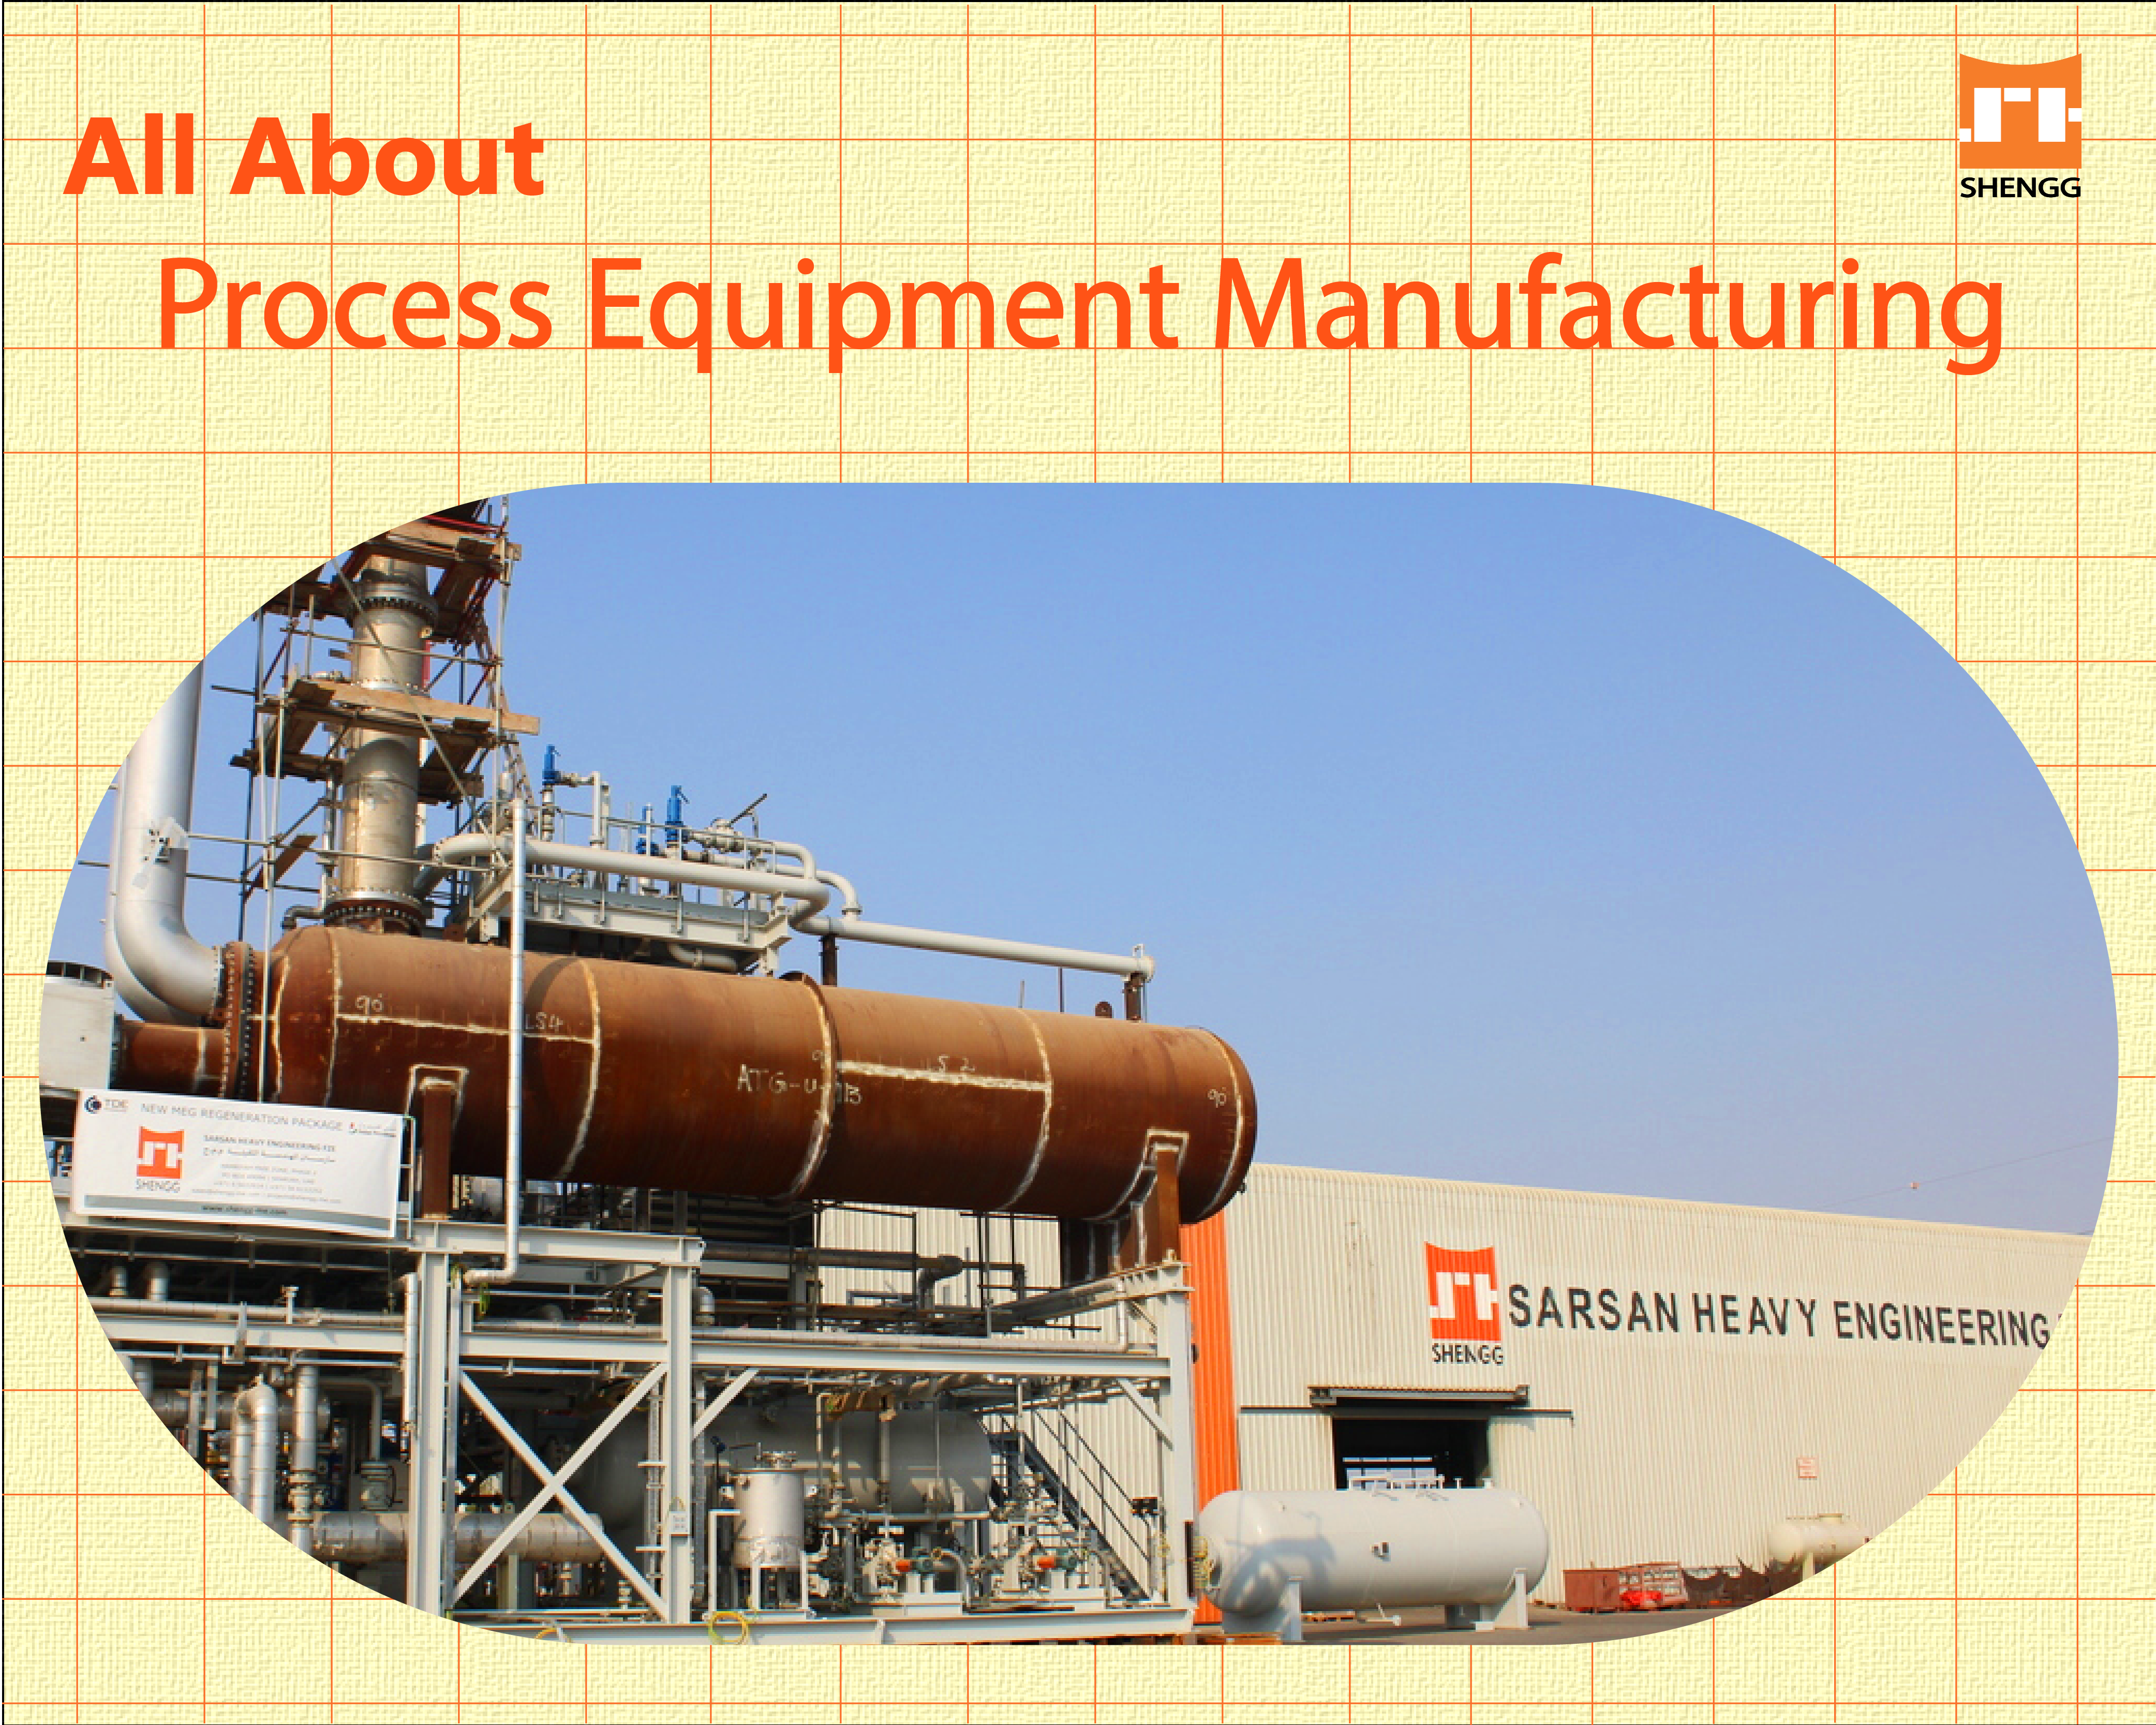 All About: Process Equipment Manufacturing